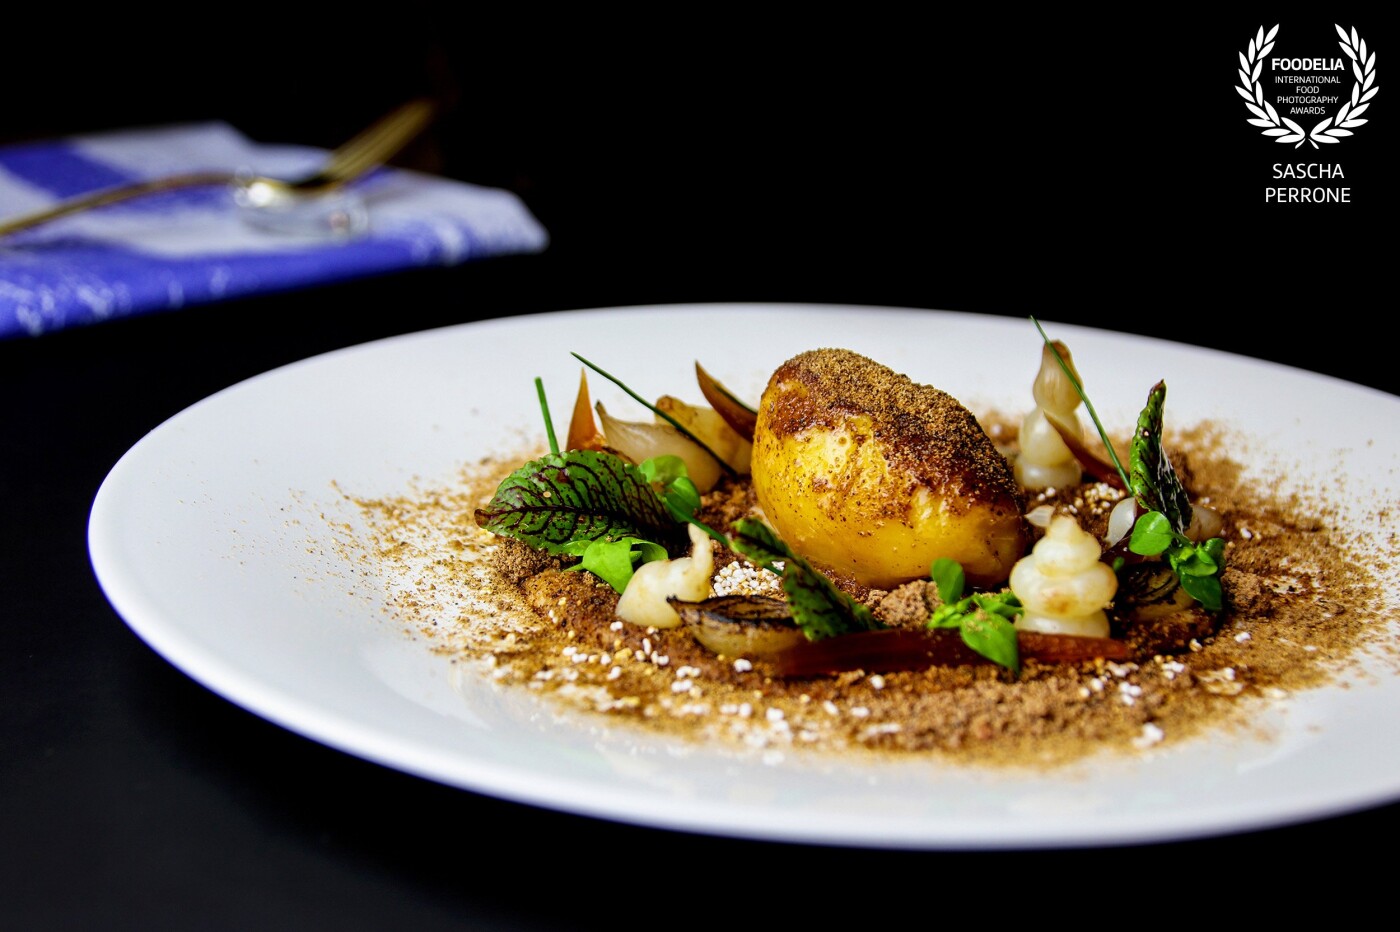 A creative dish called the potato field with potatoes, onions and herbs from 1 star MICHELIN chef Benjamin Kriegel in the FRITZ's FRAU FRANZI restaurant at THE FRITZ Hotel (Düsseldorf, Germany).